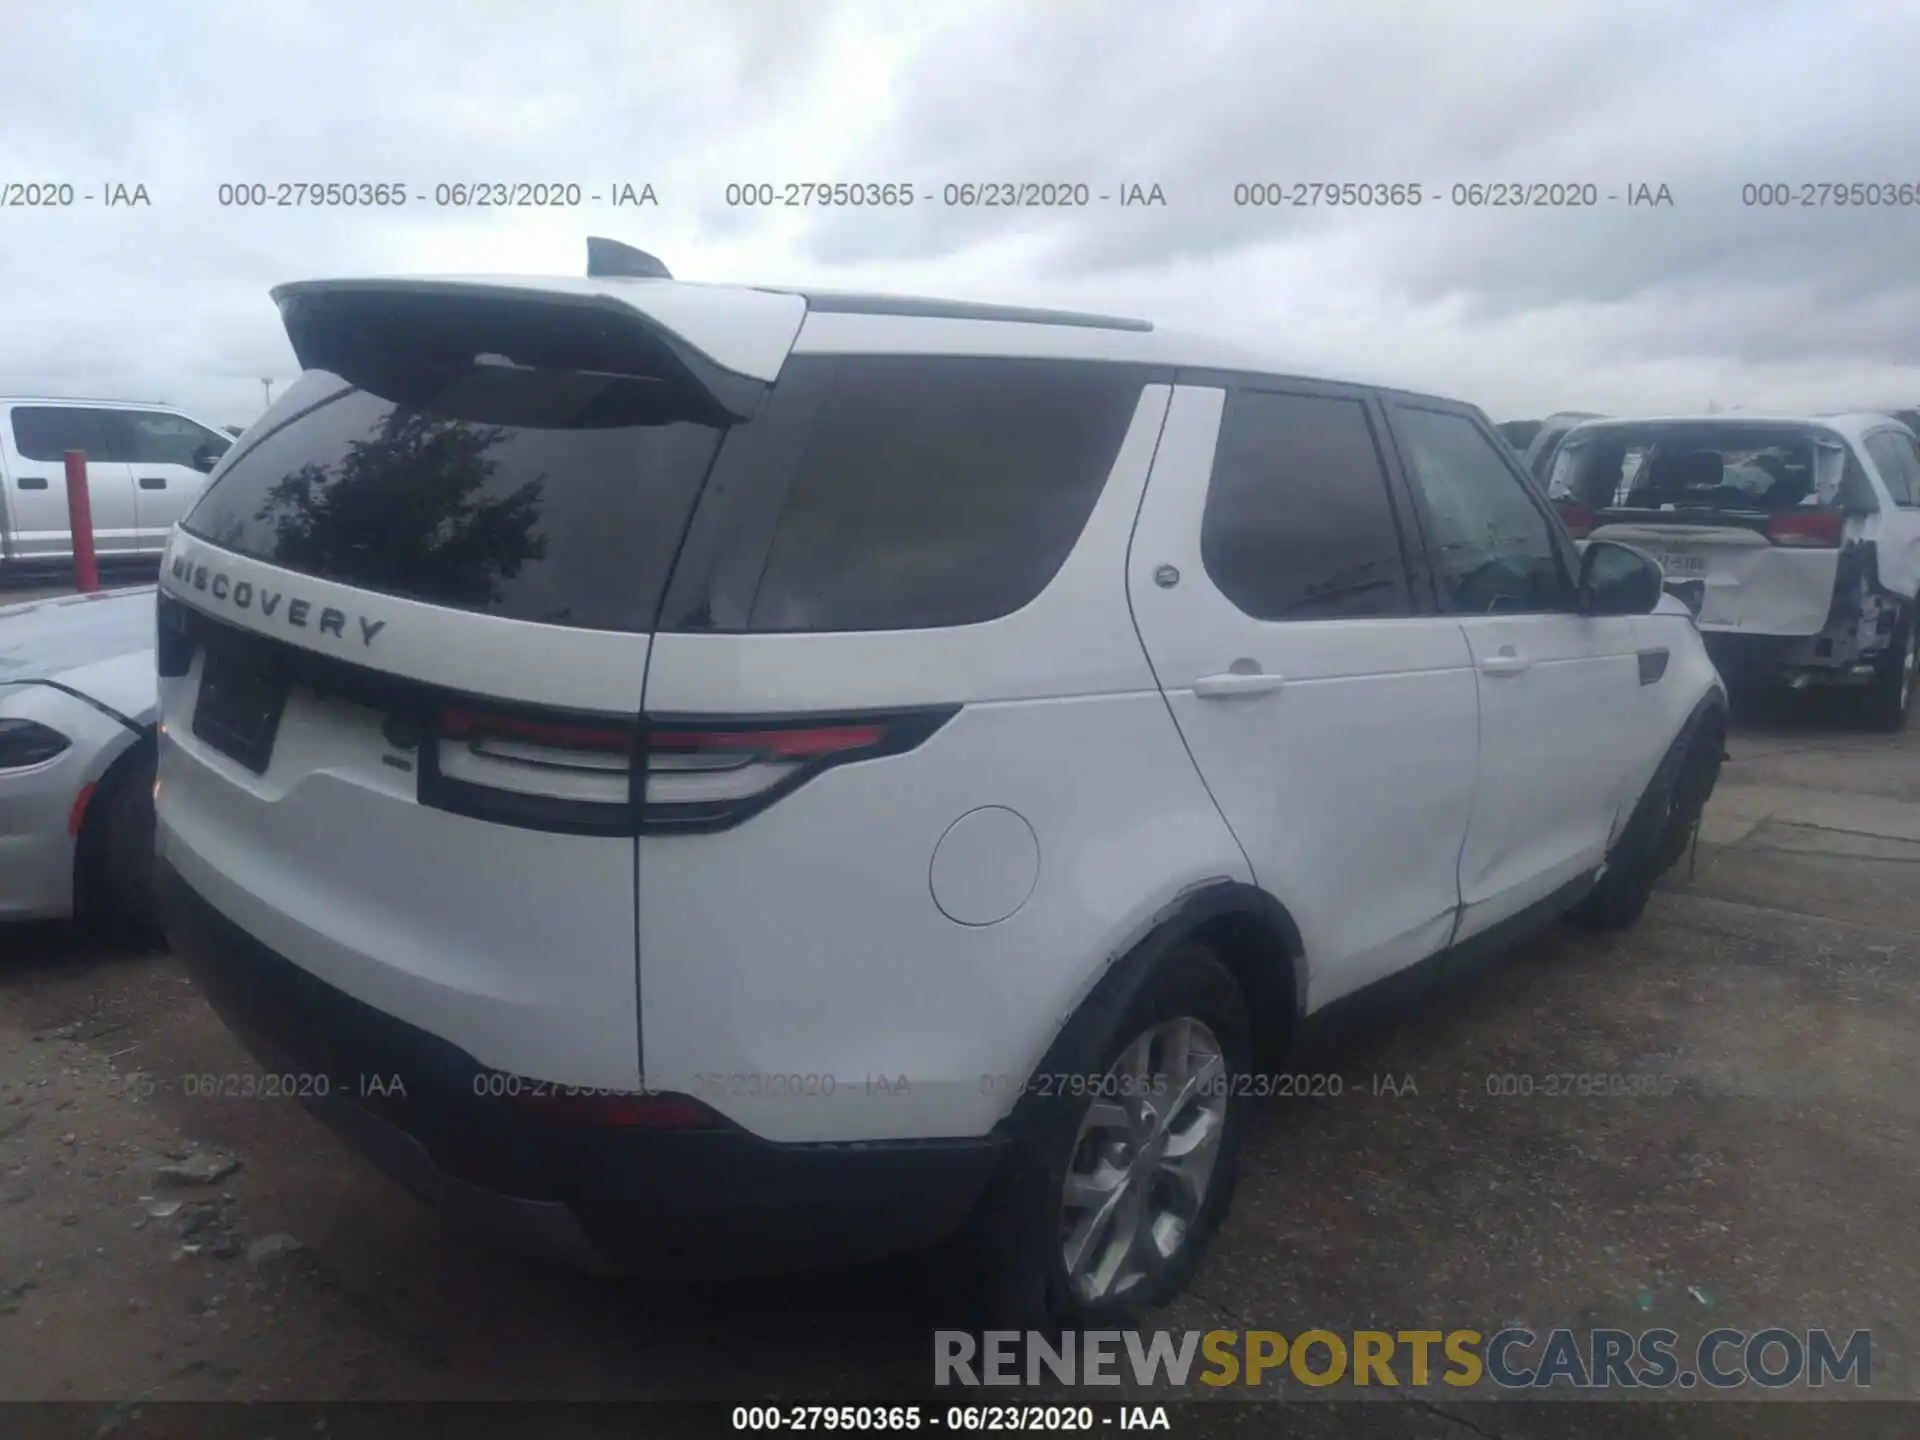 4 Photograph of a damaged car SALRG2RV2L2425475 LAND ROVER DISCOVERY 2020